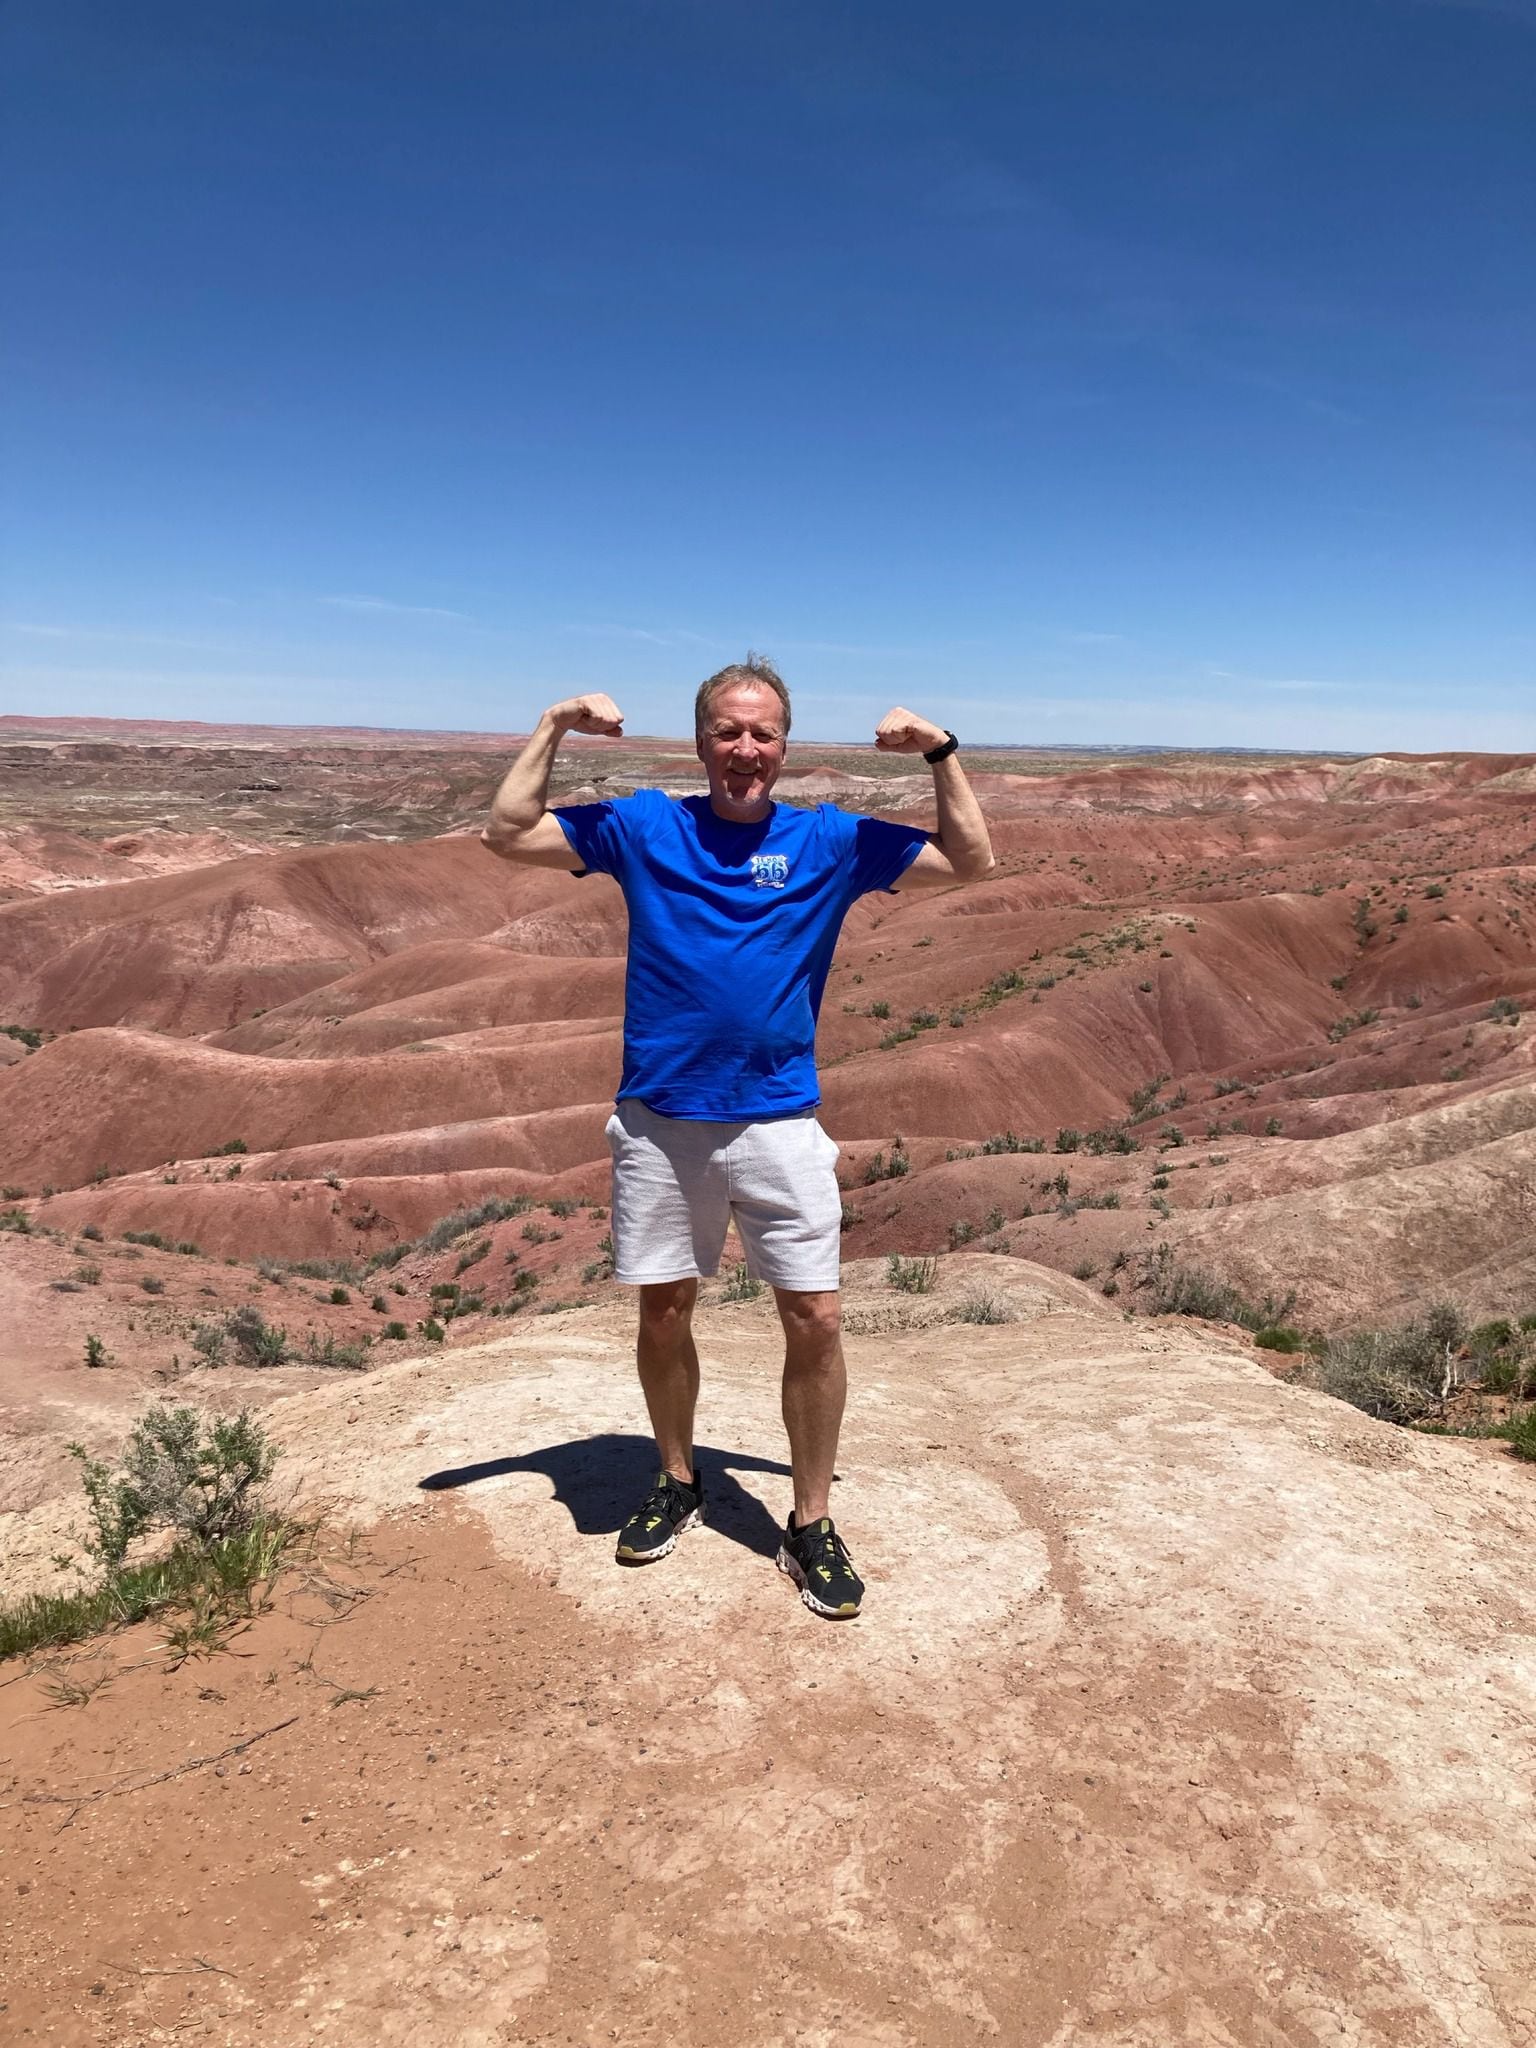 Slocum and crew pay a visit to the Painted Desert.